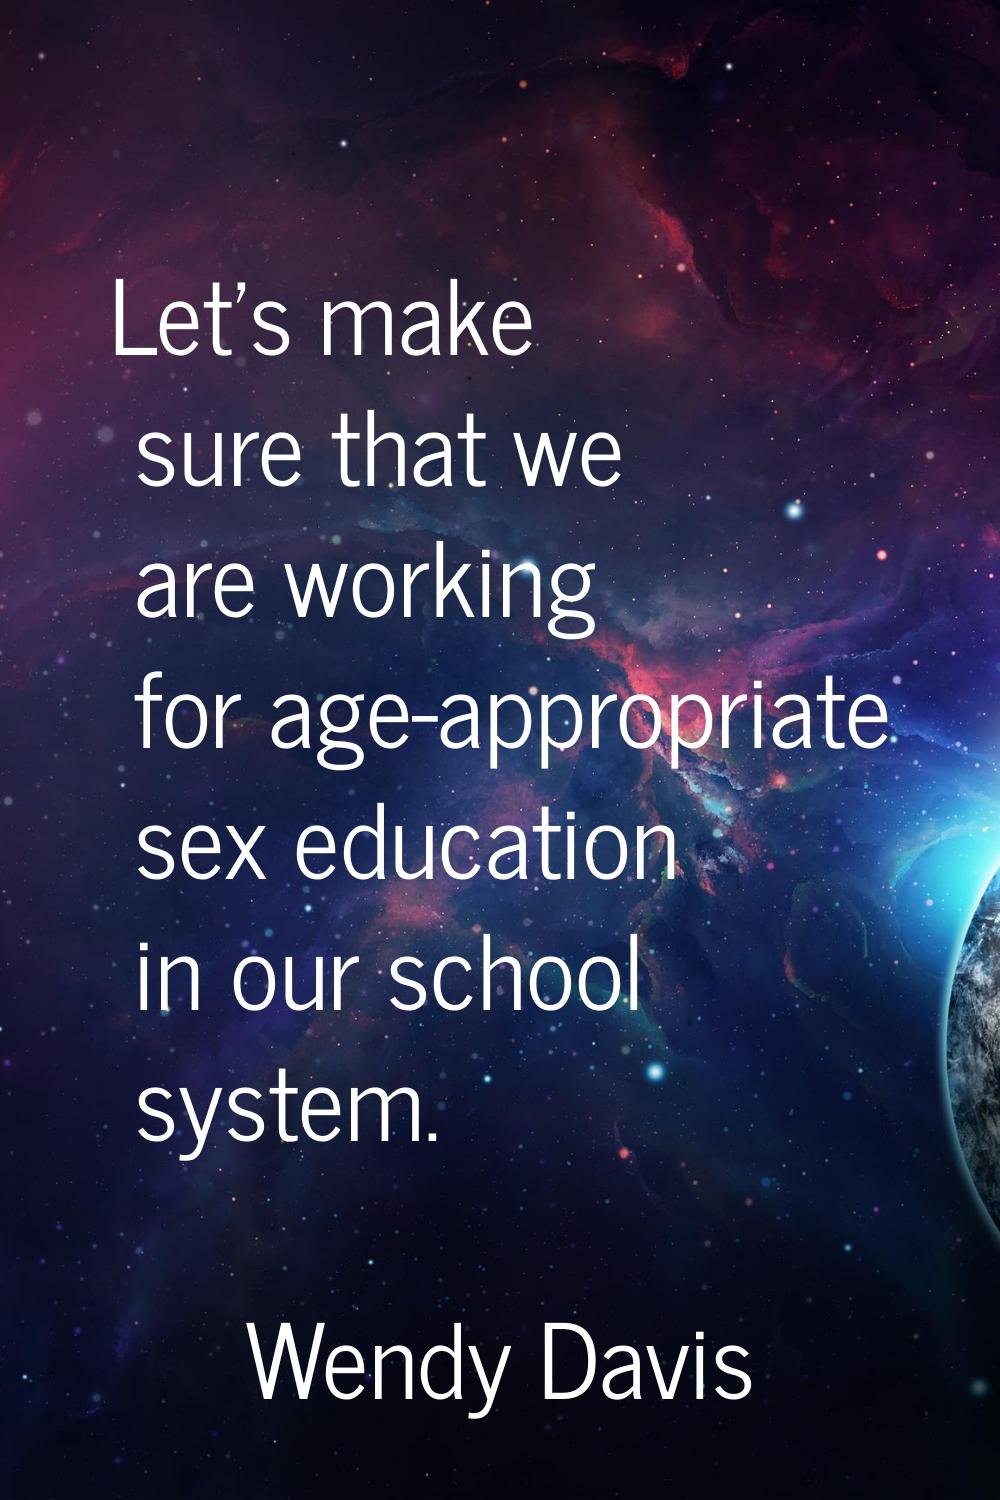 Let's make sure that we are working for age-appropriate sex education in our school system.